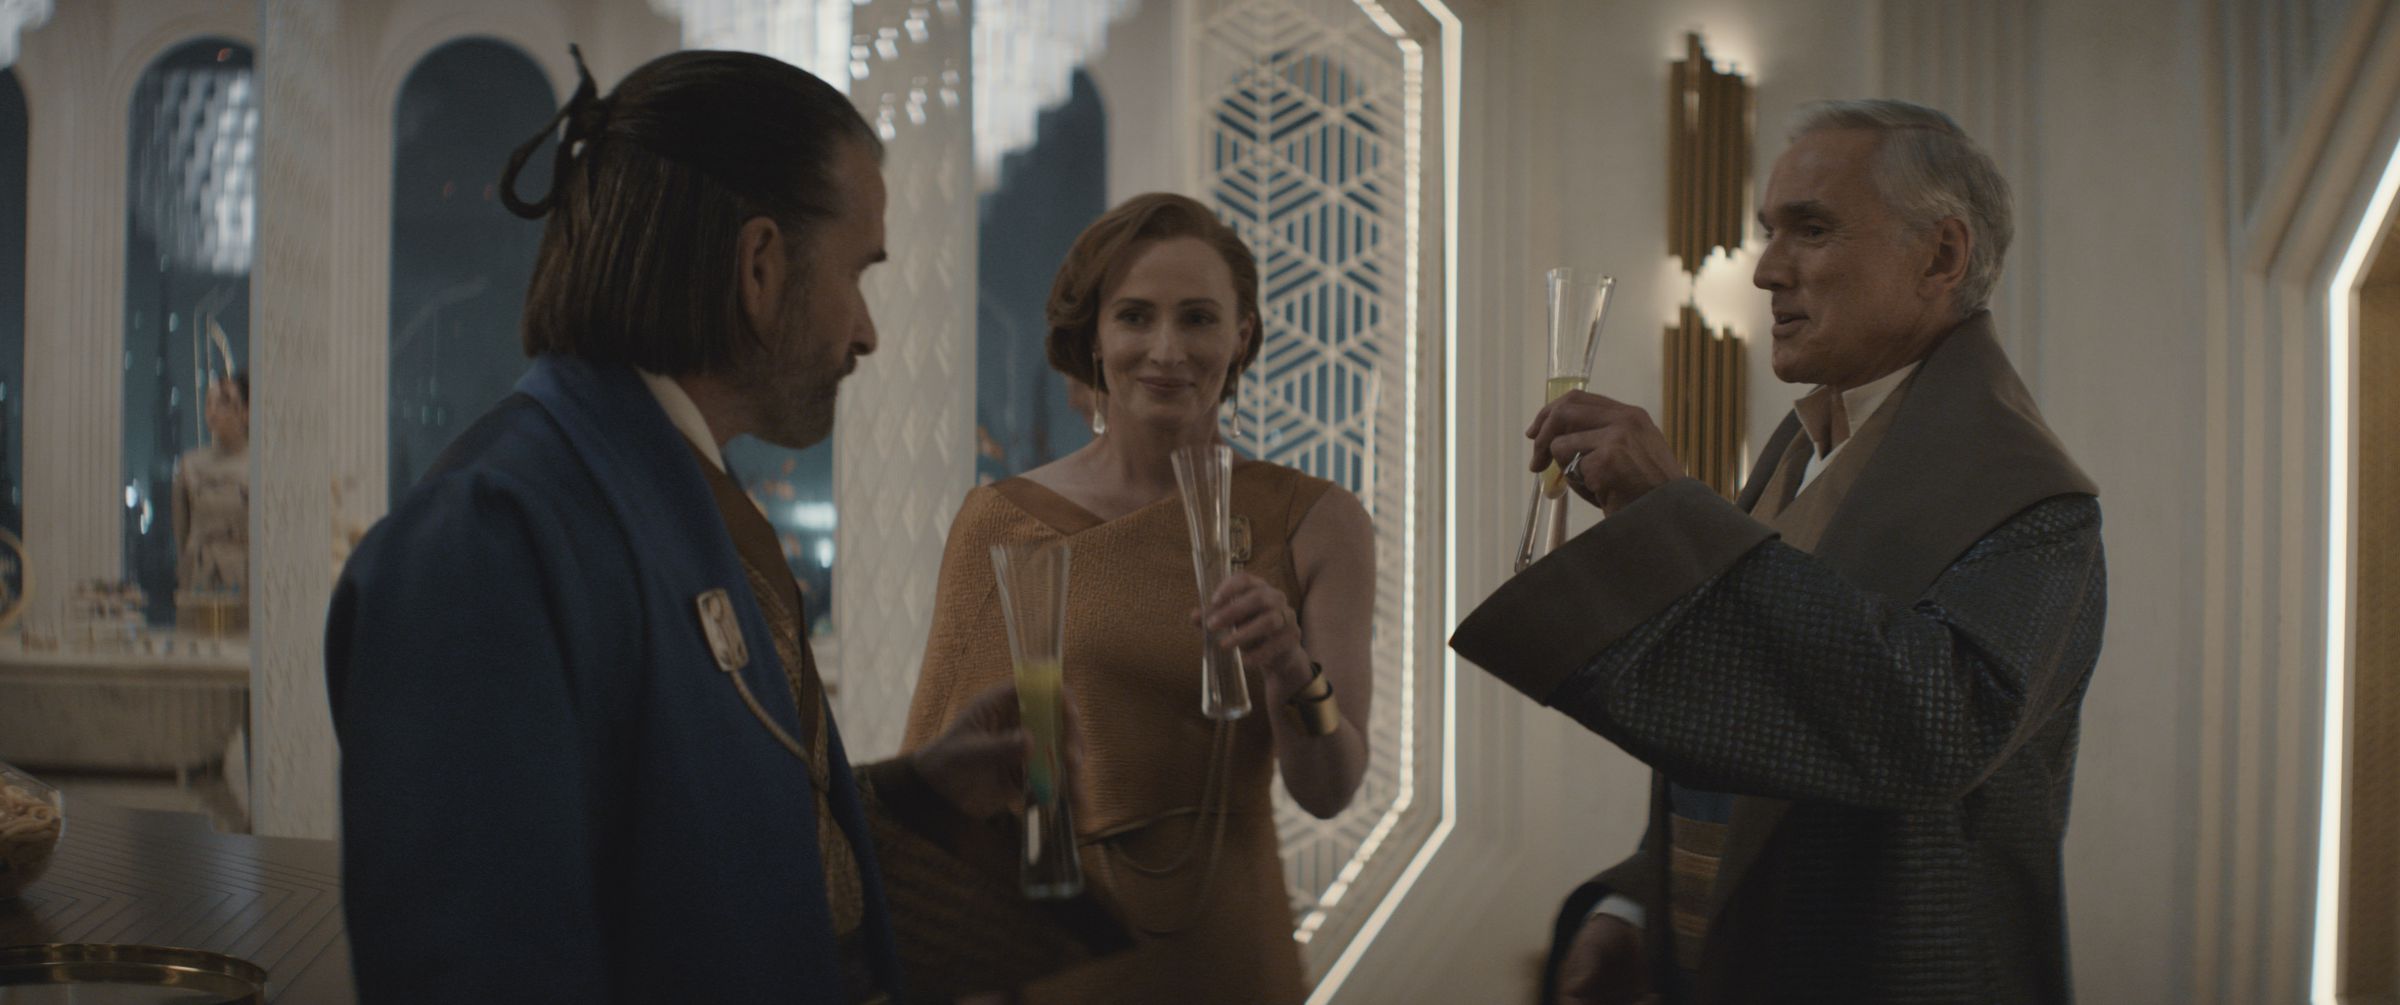 Two men and a woman in formal evening wear sharing a toast with one another at a soiree.